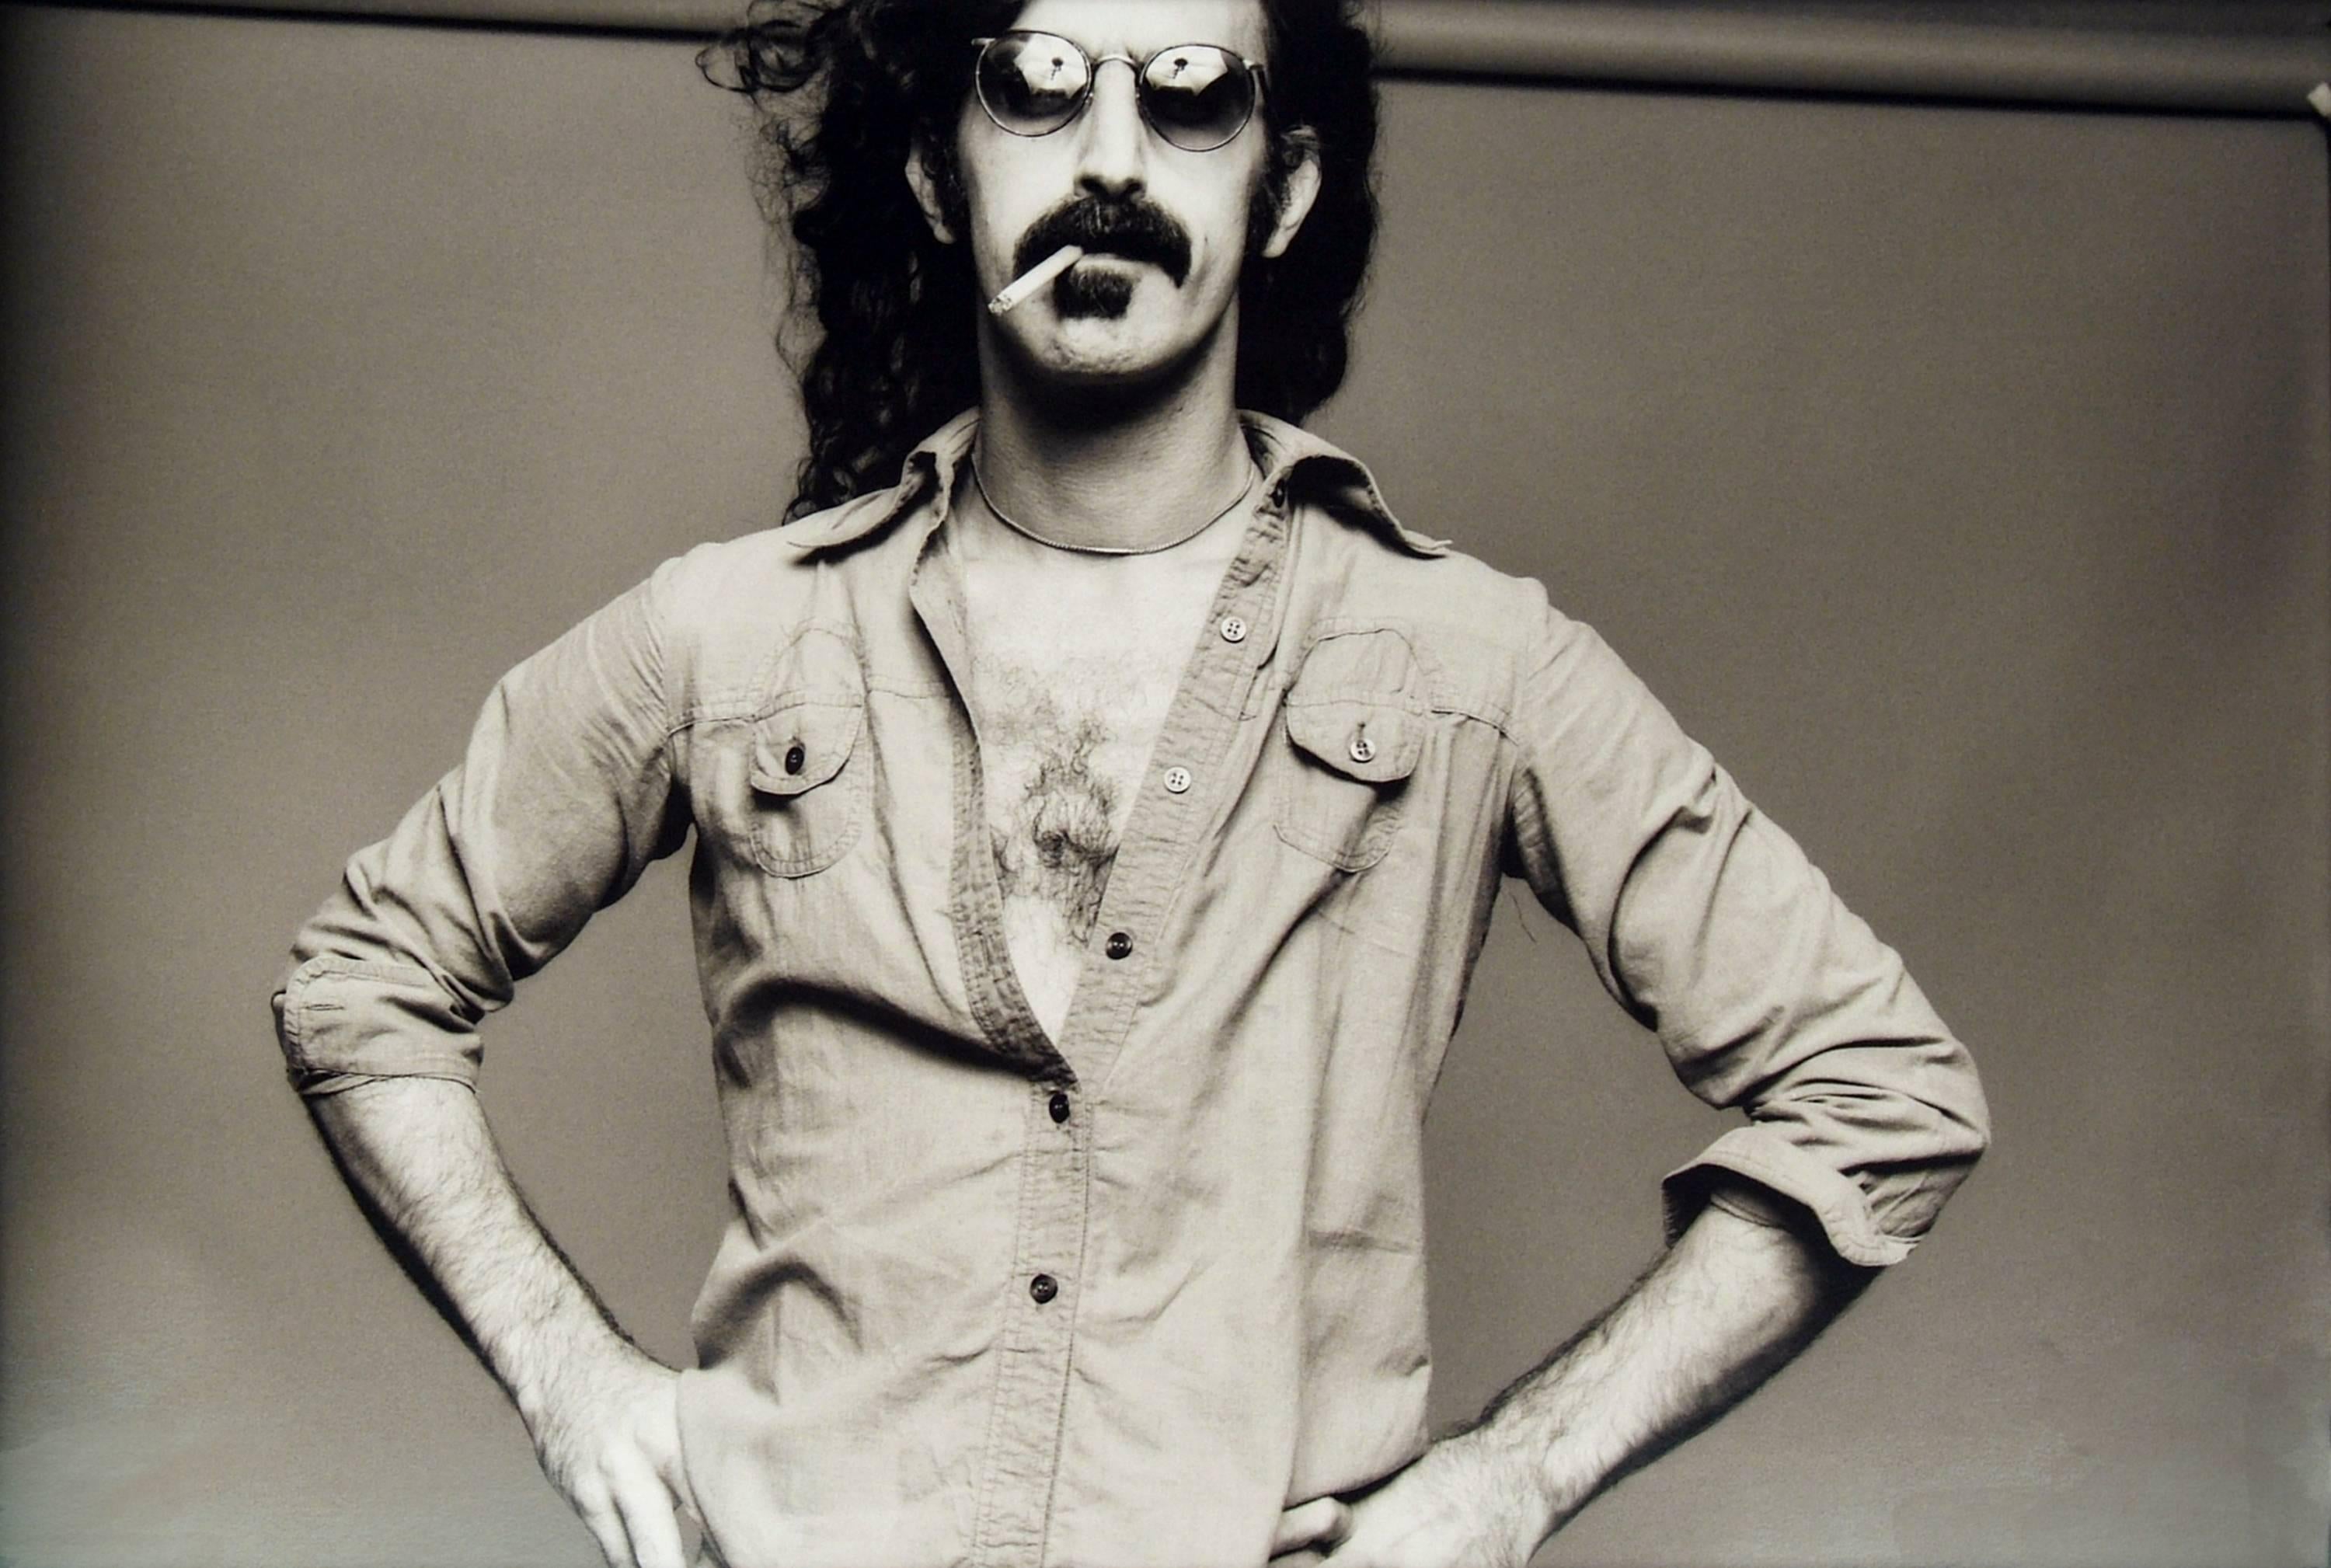 Norman Seeff Black and White Photograph - Frank Zappa, 16"x20", Vintage Silver Gelatin Print, framed